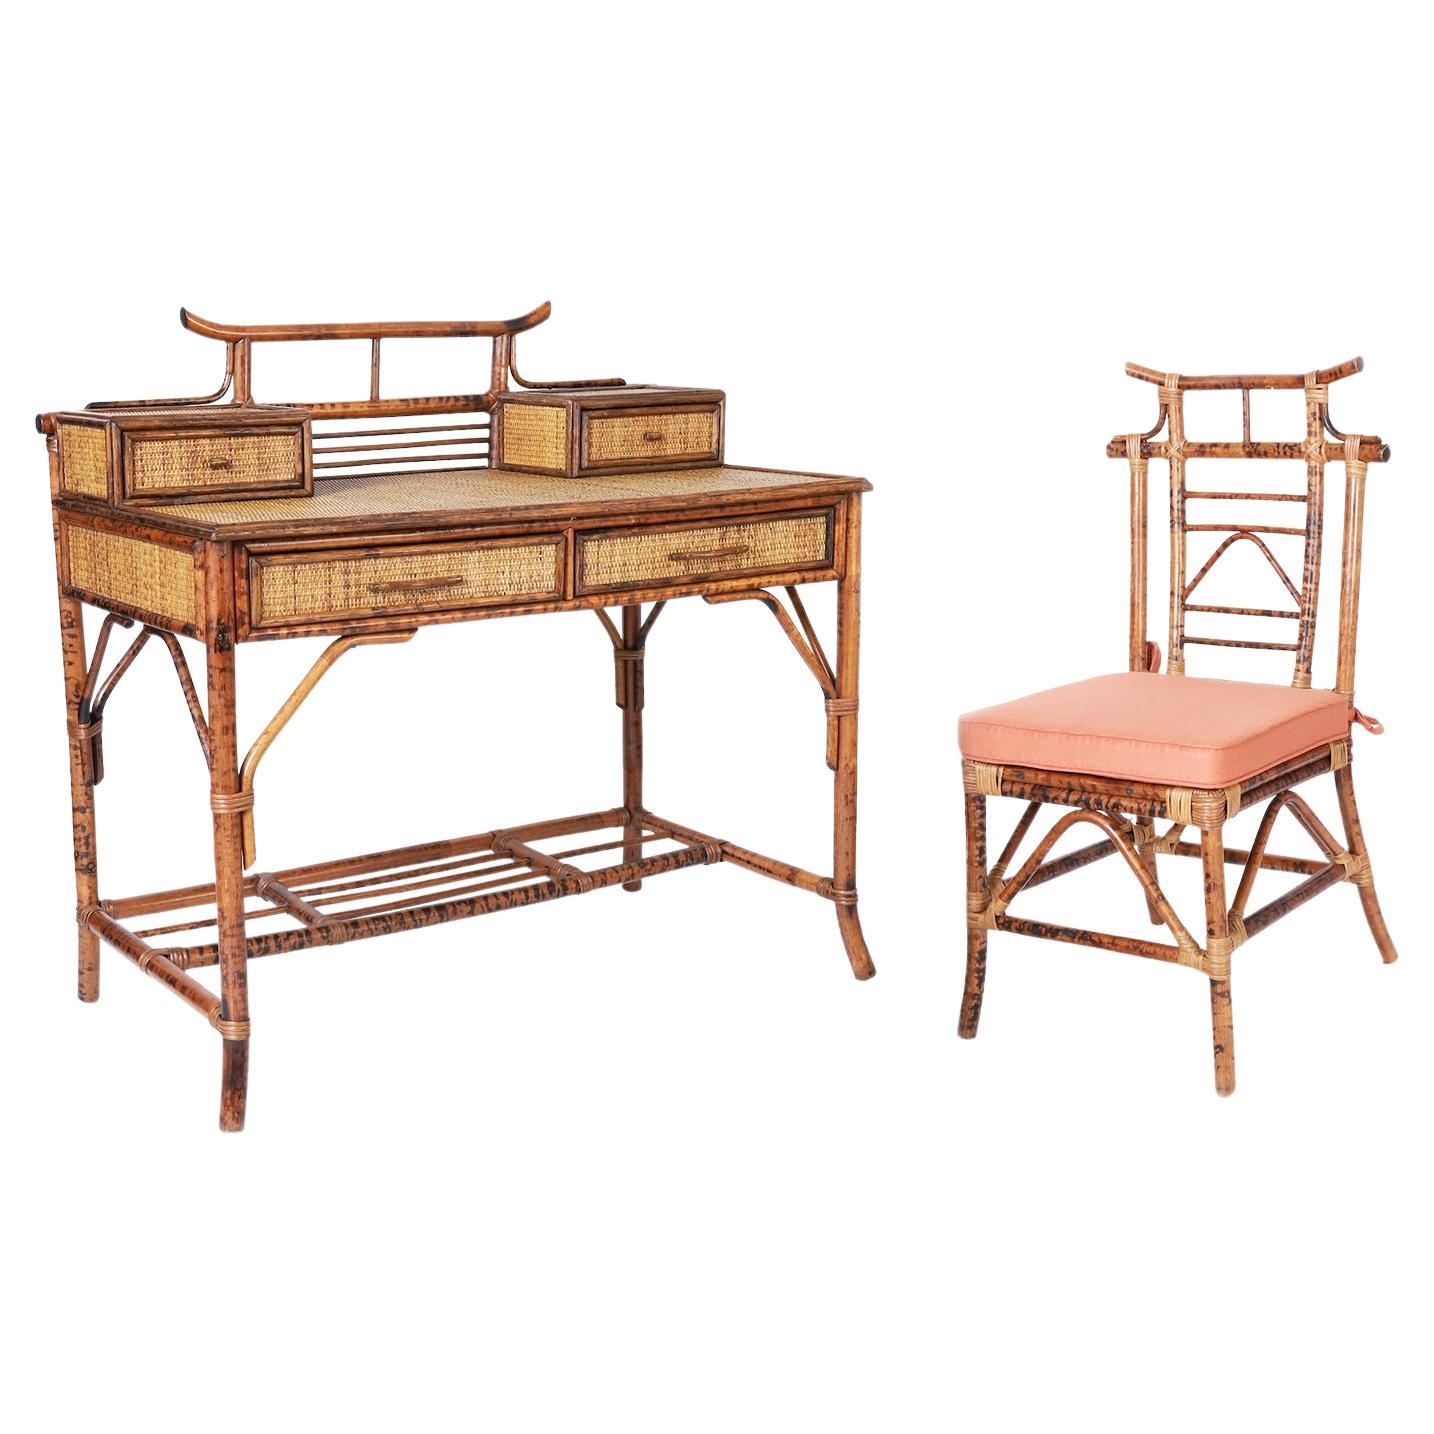 British Colonial Style Burnt Bamboo and Grasscloth Pagoda Desk and Chair